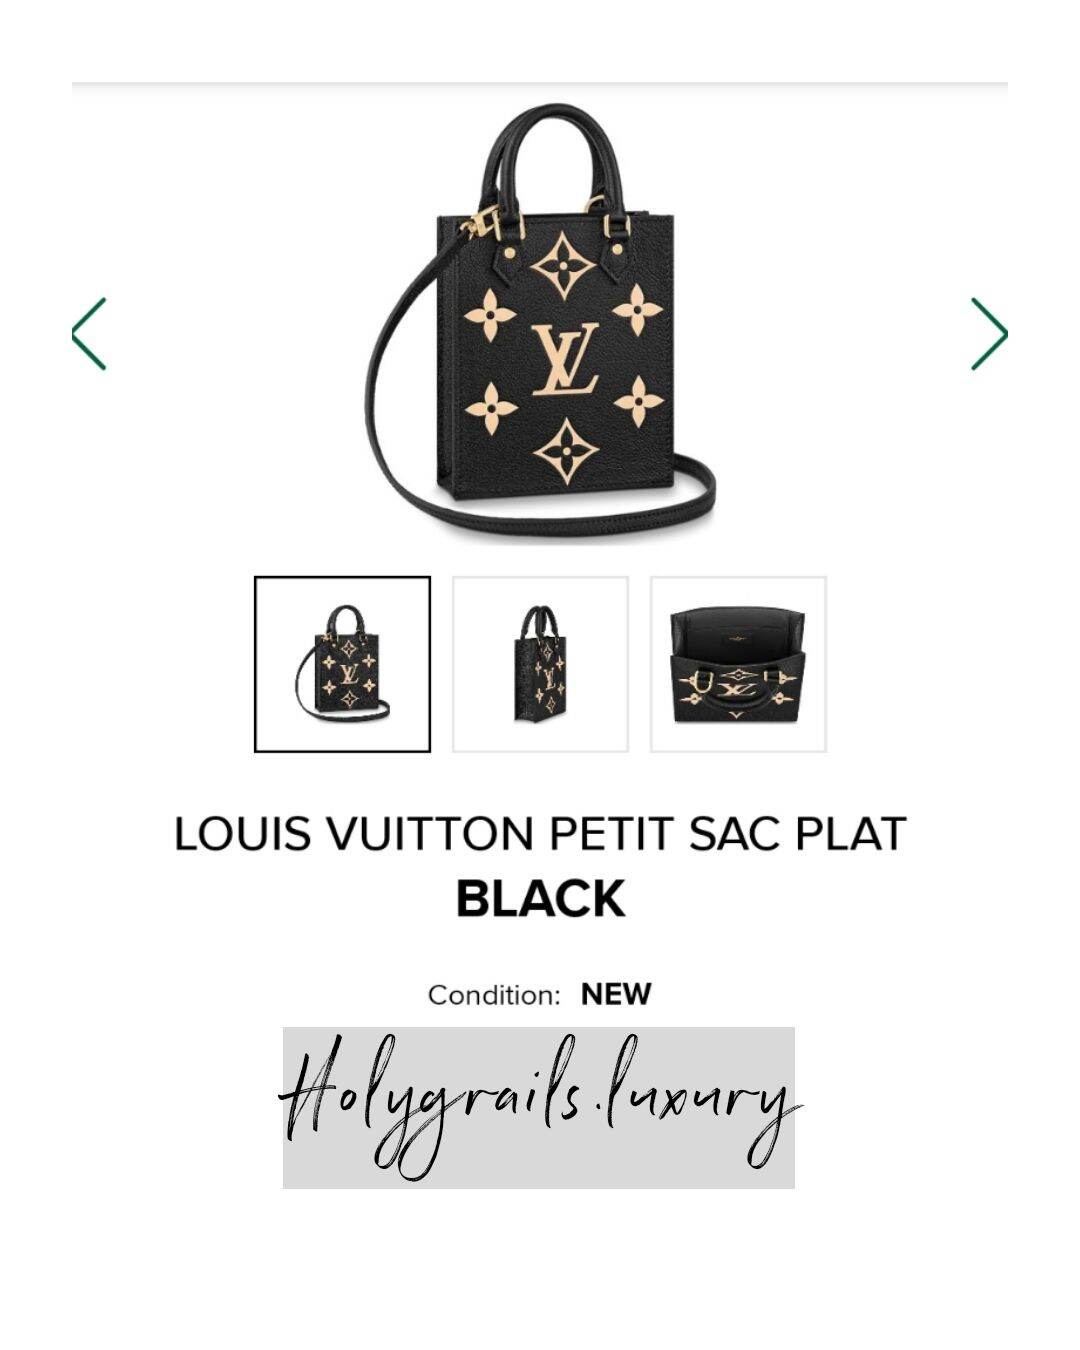 How much does a Louis Vuitton backpack cost? Where can I buy one? - Quora